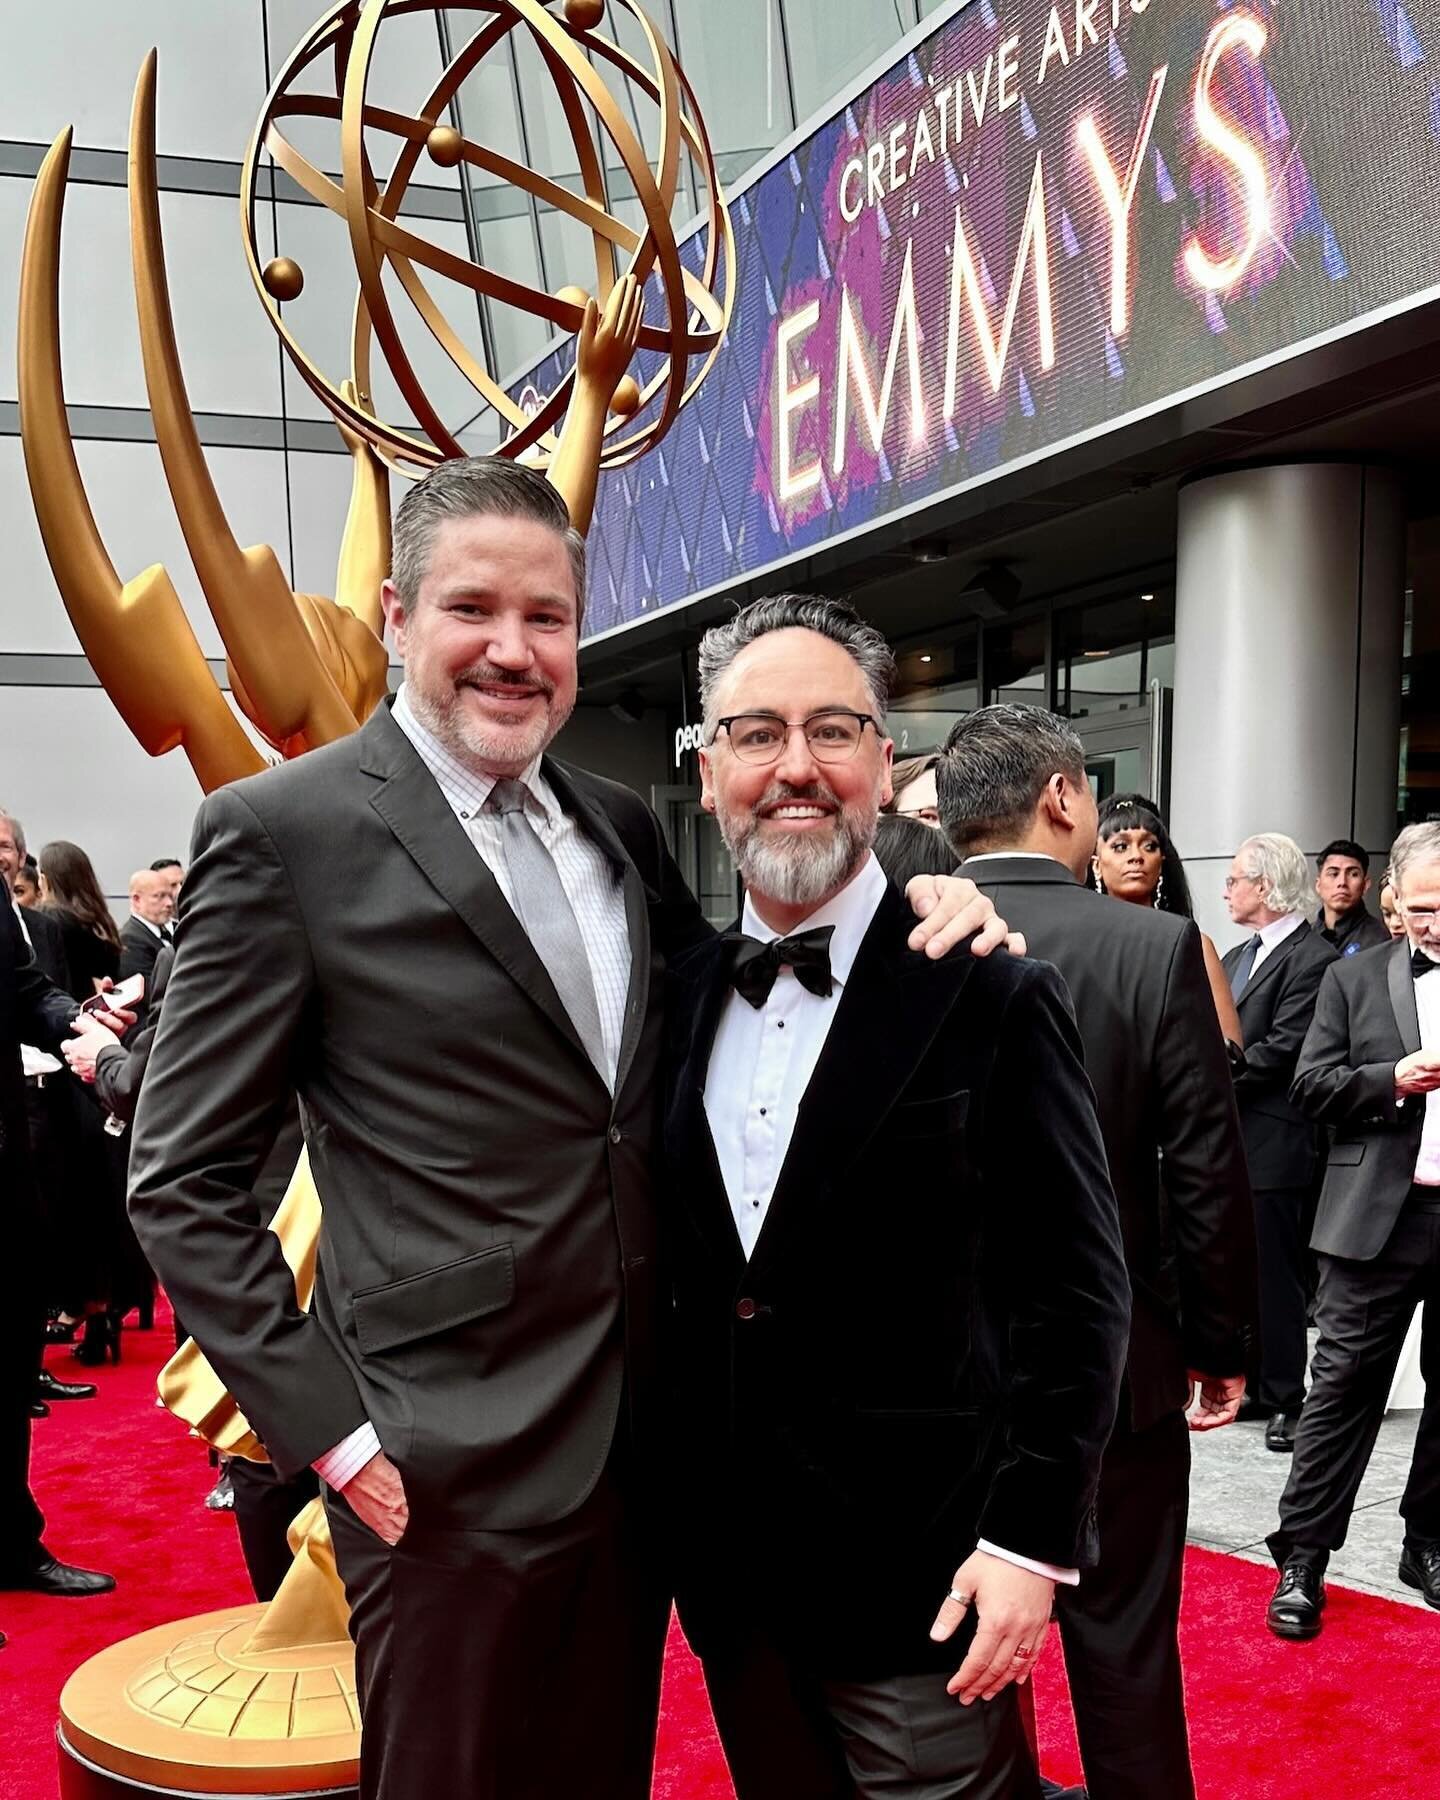 Pinnacle Post founders, Beau Borders and Damian Del Borrello, at the 75th Creative Arts Emmy Awards.

And Beau Borders, Jason Smith, Stefanie Ng, Andrew Moore, Damian Del Borrello and Lindsey Alvarez from The Lord of the Rings: The Rings of Power sou